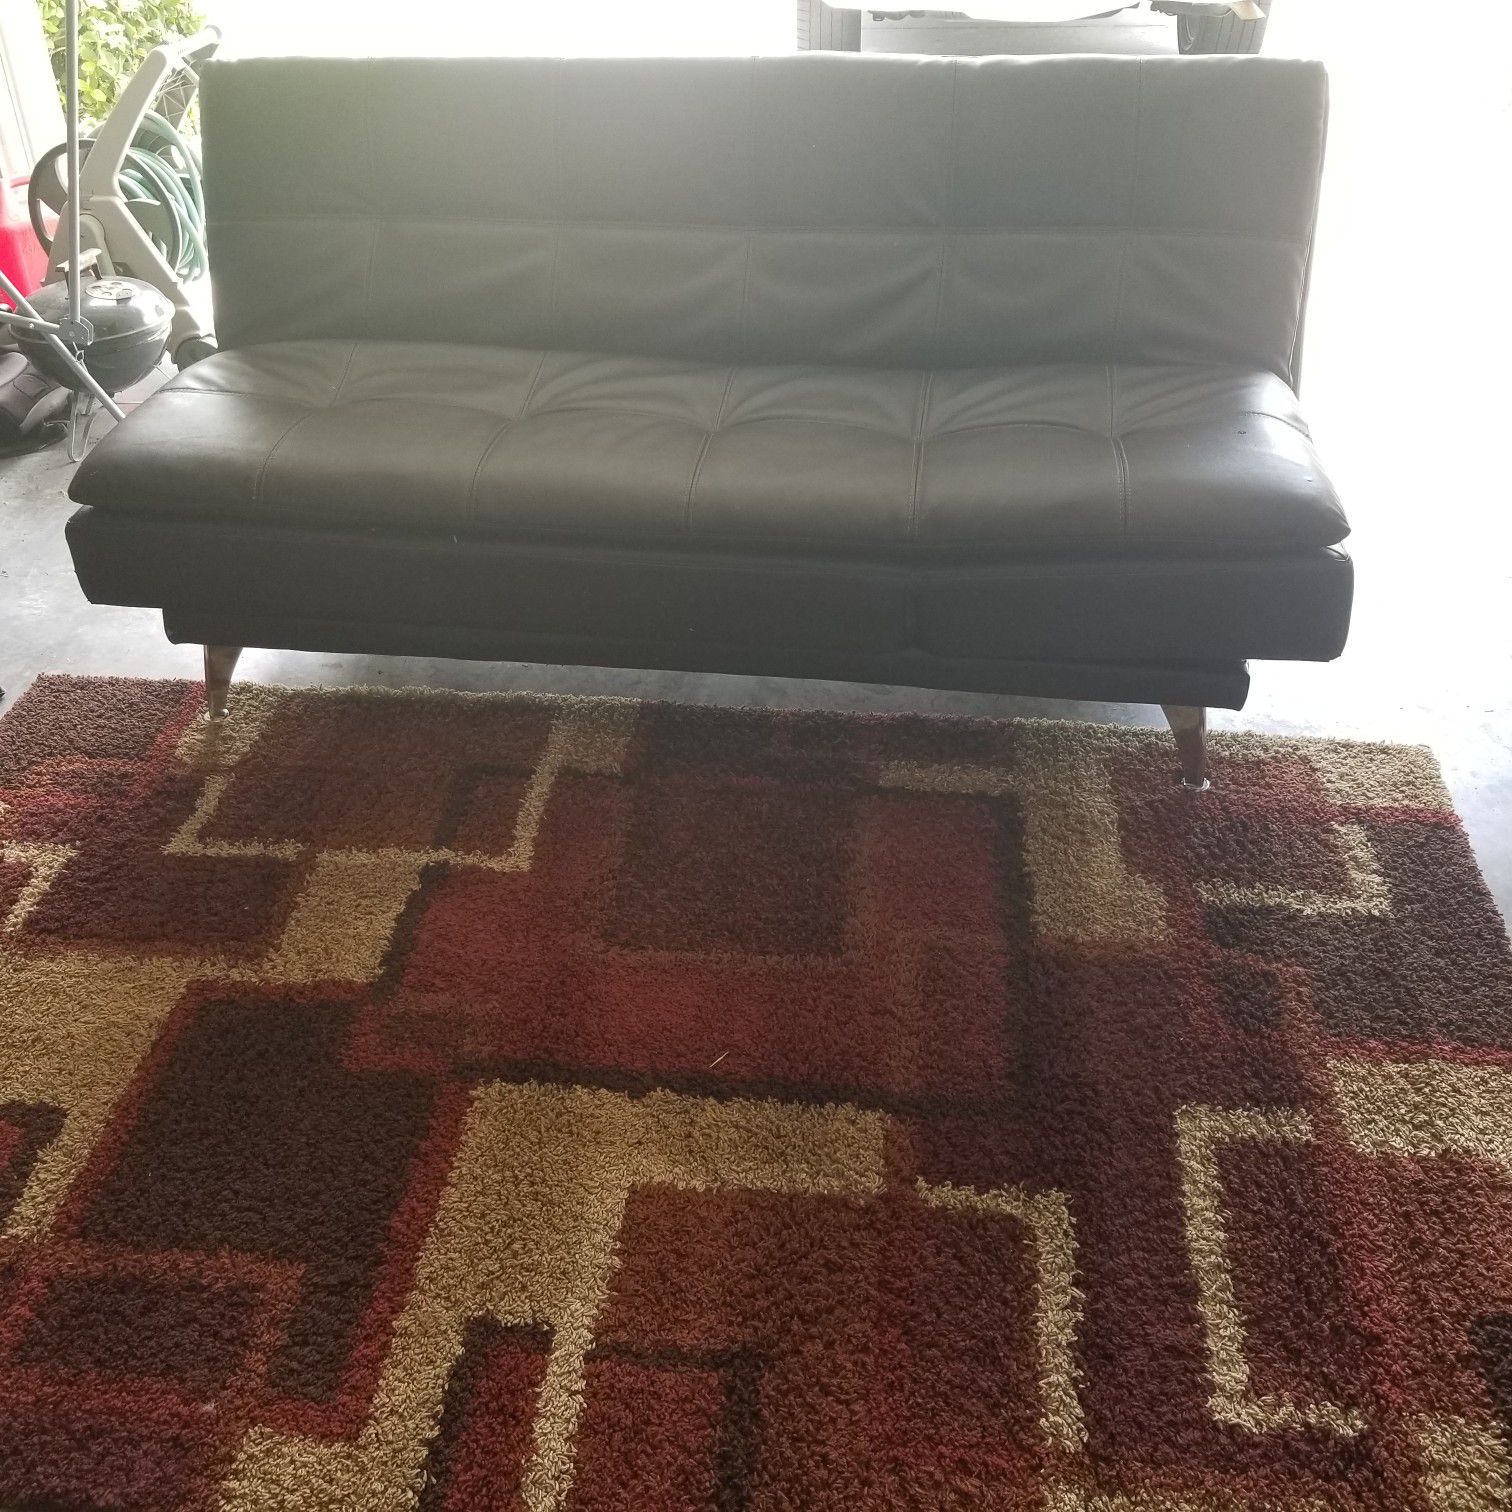 Leather Futon and rug